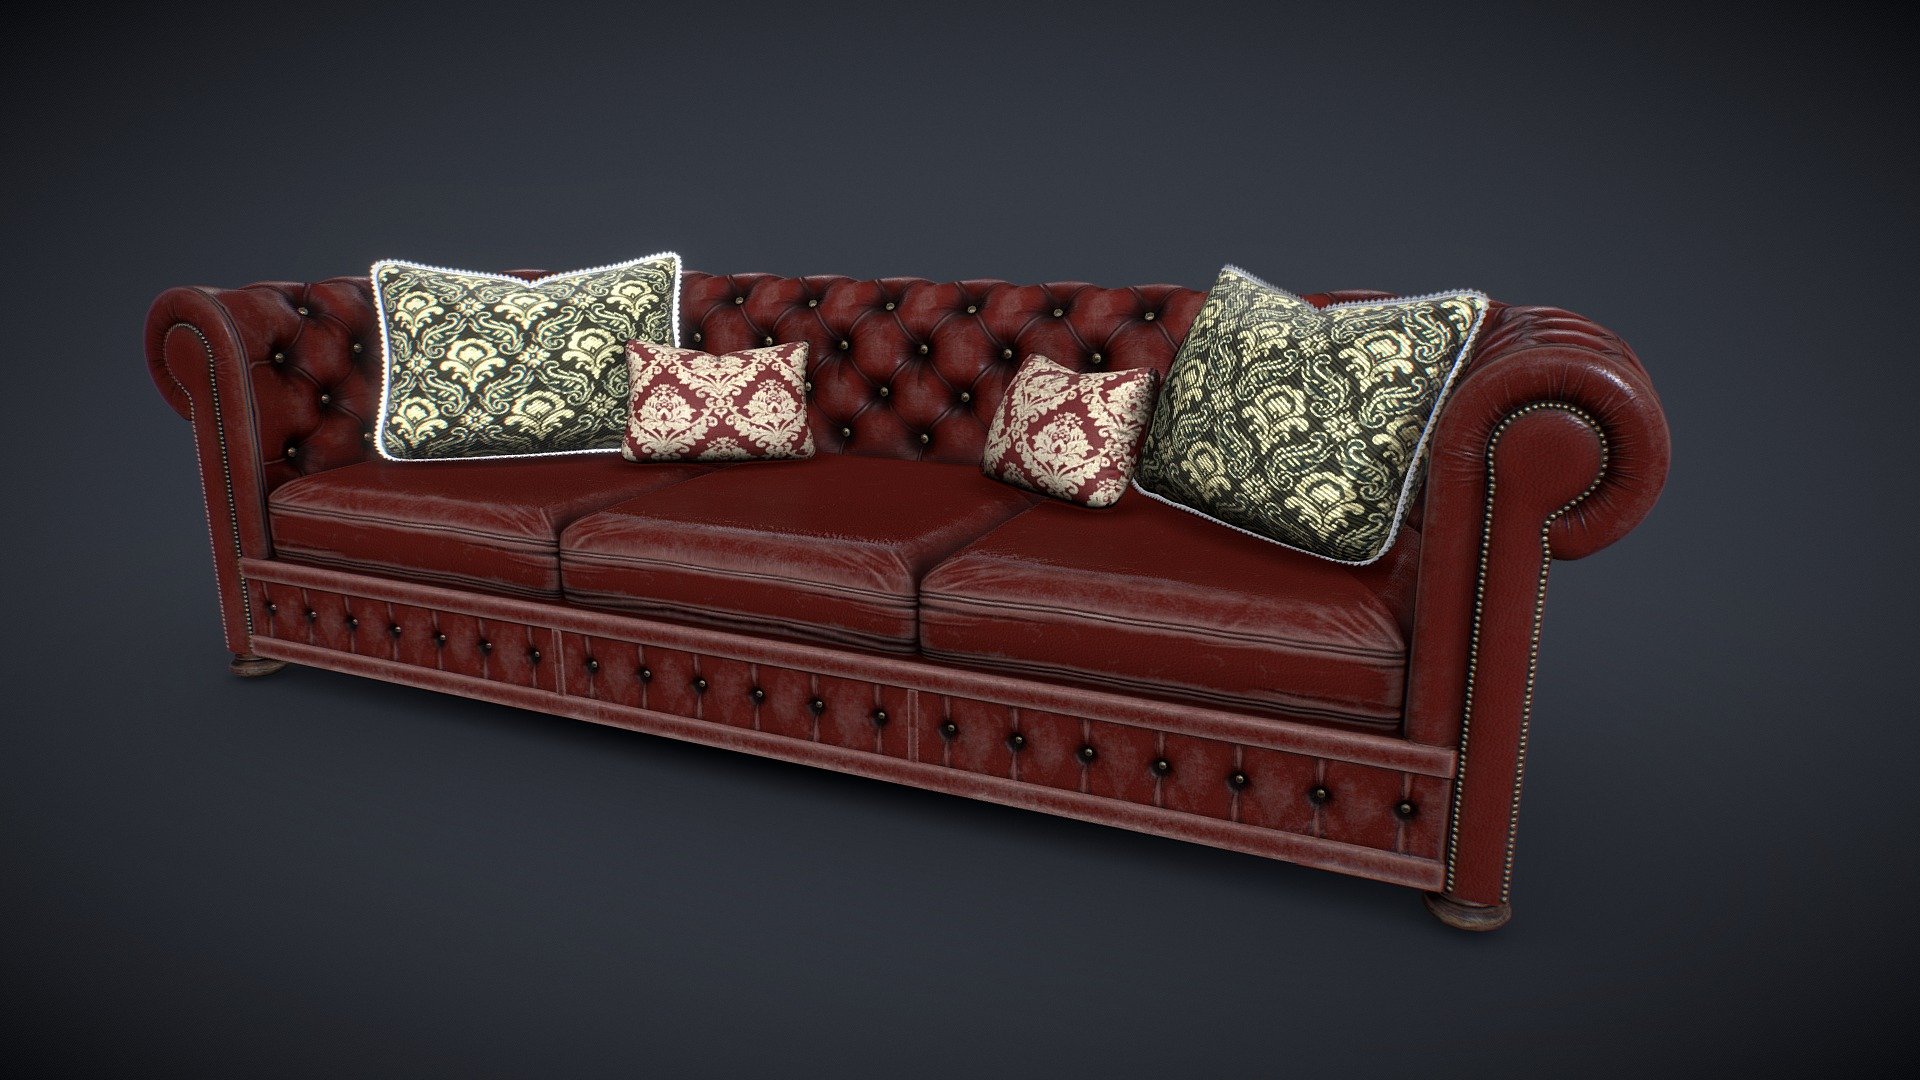 Hello all :) This is a slarge sofa made for a victorian project. Red padded leather material but still, confortable.

Made with Maya, PS and Substance.

You will find in the package Scene file, FBX and 2k Textures.
If you have any customs need, please feel free to contact me 3d model